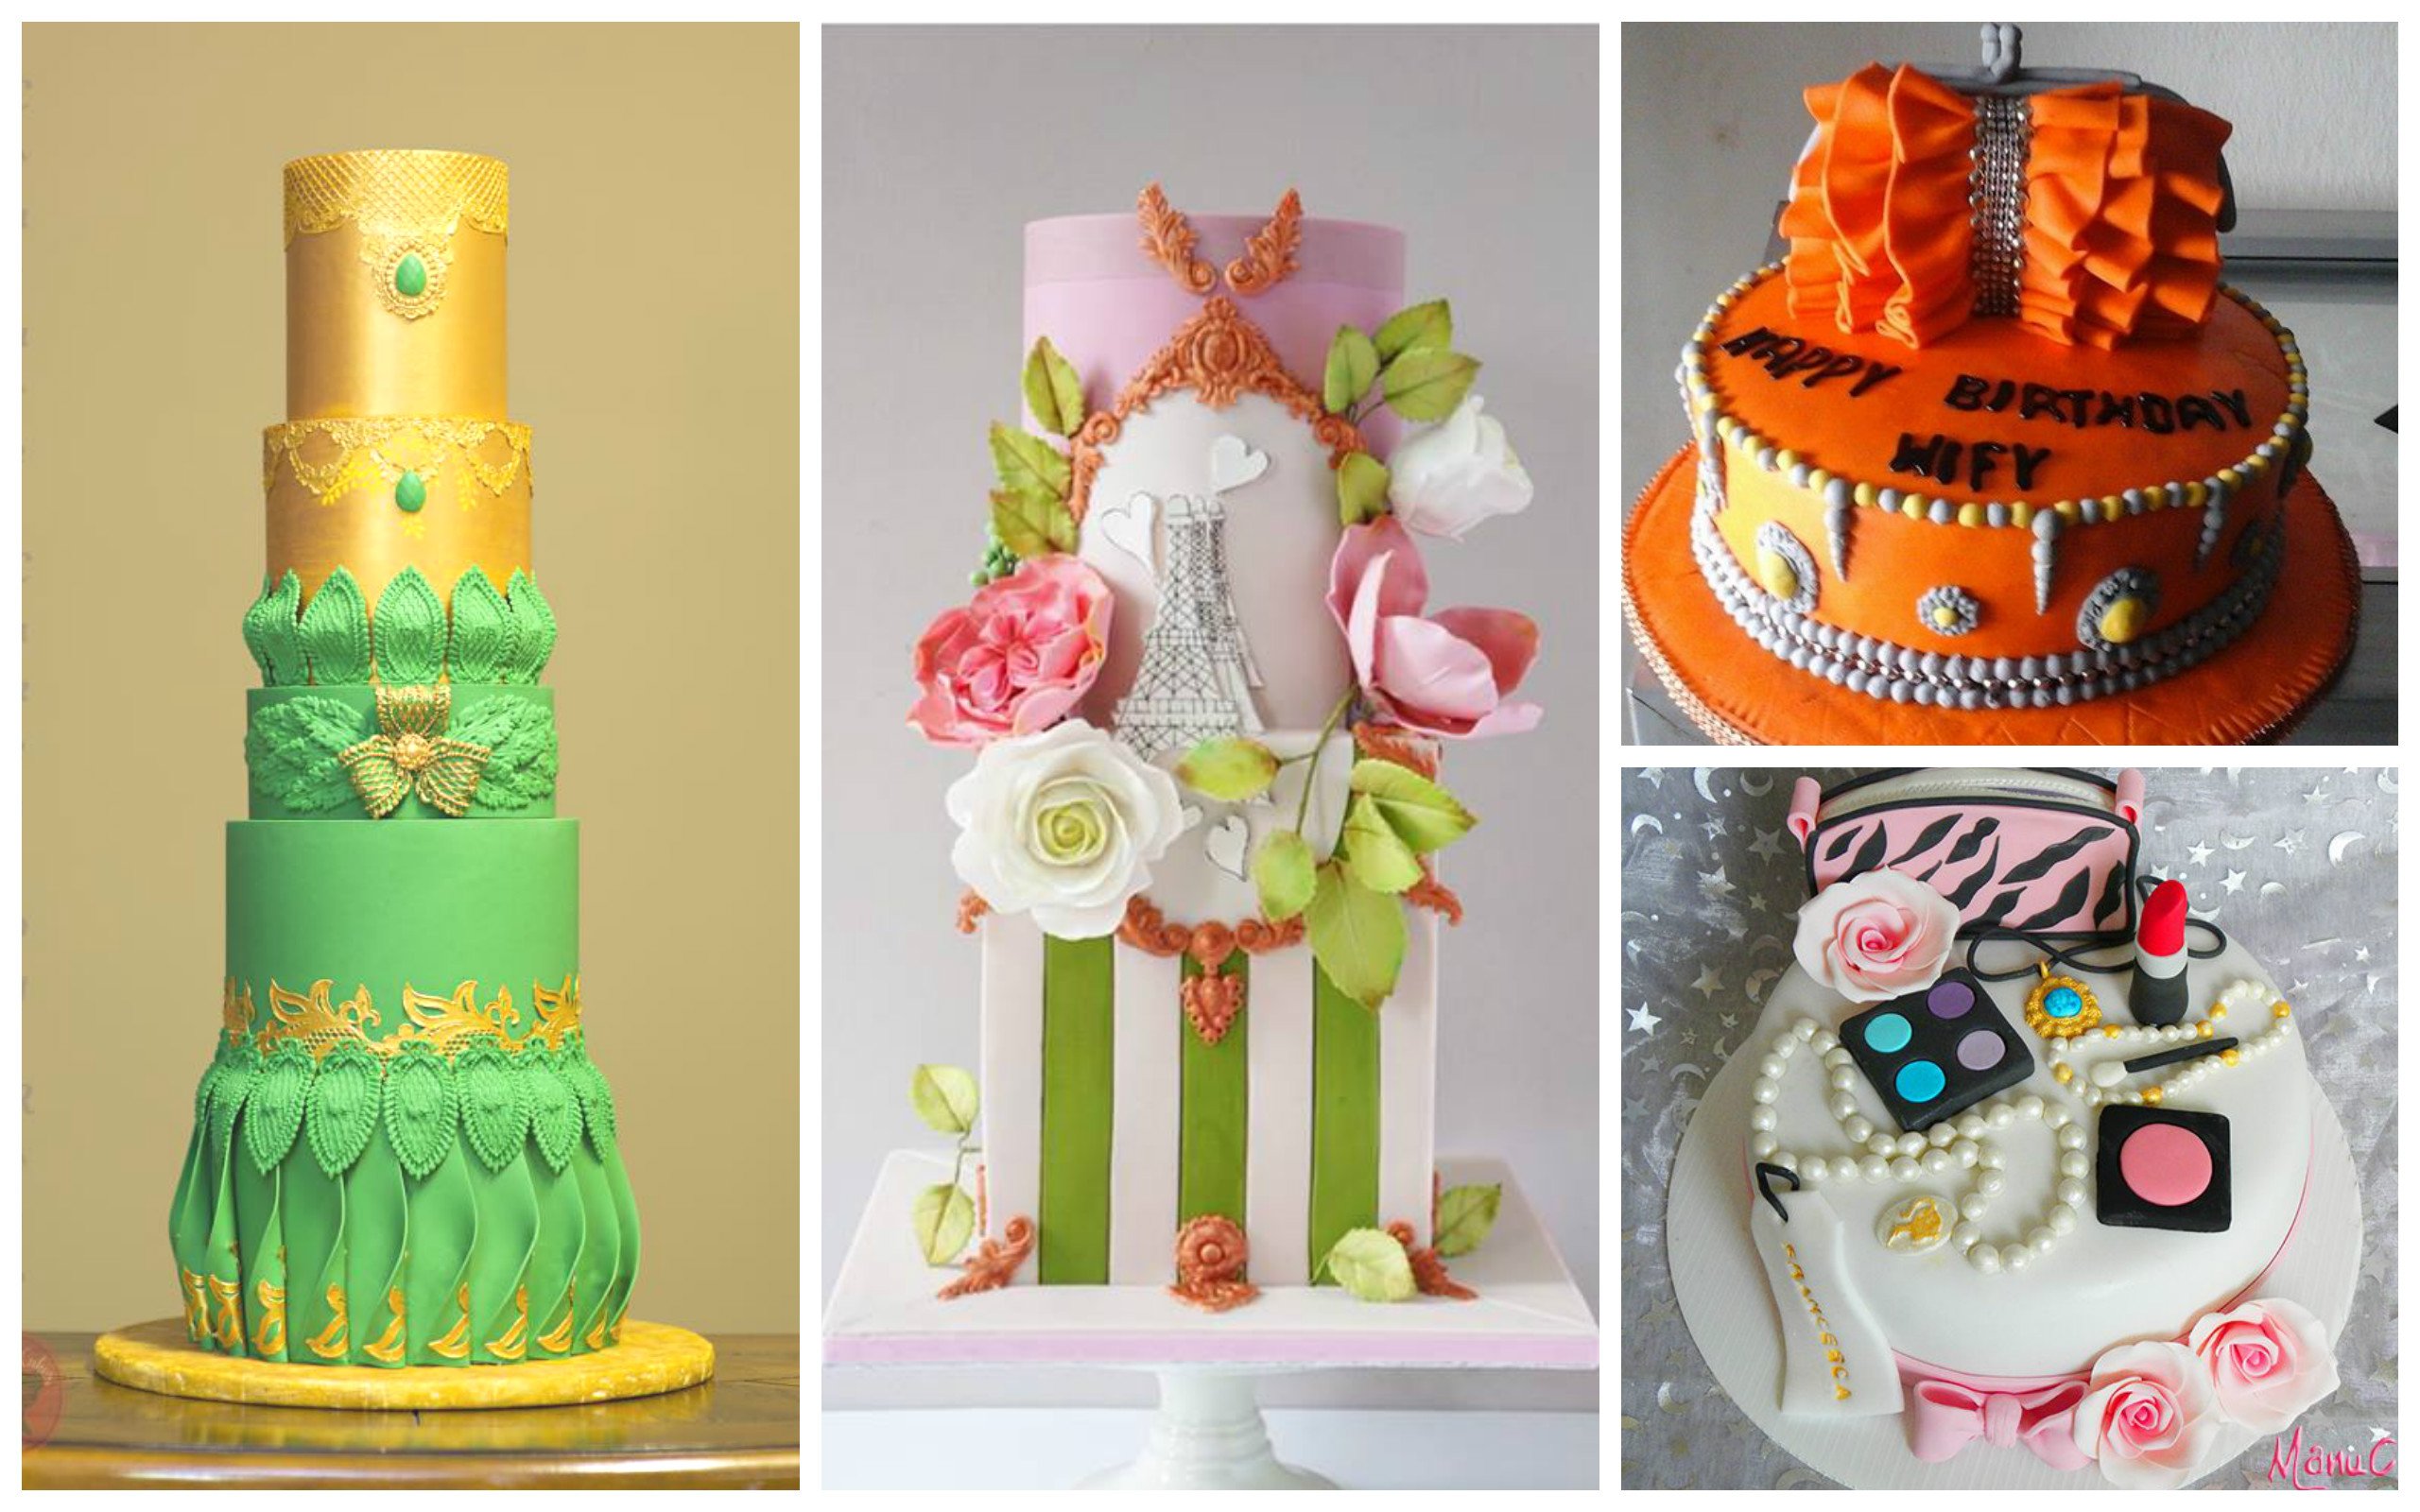 Beautiful cake Images - Search Images on Everypixel